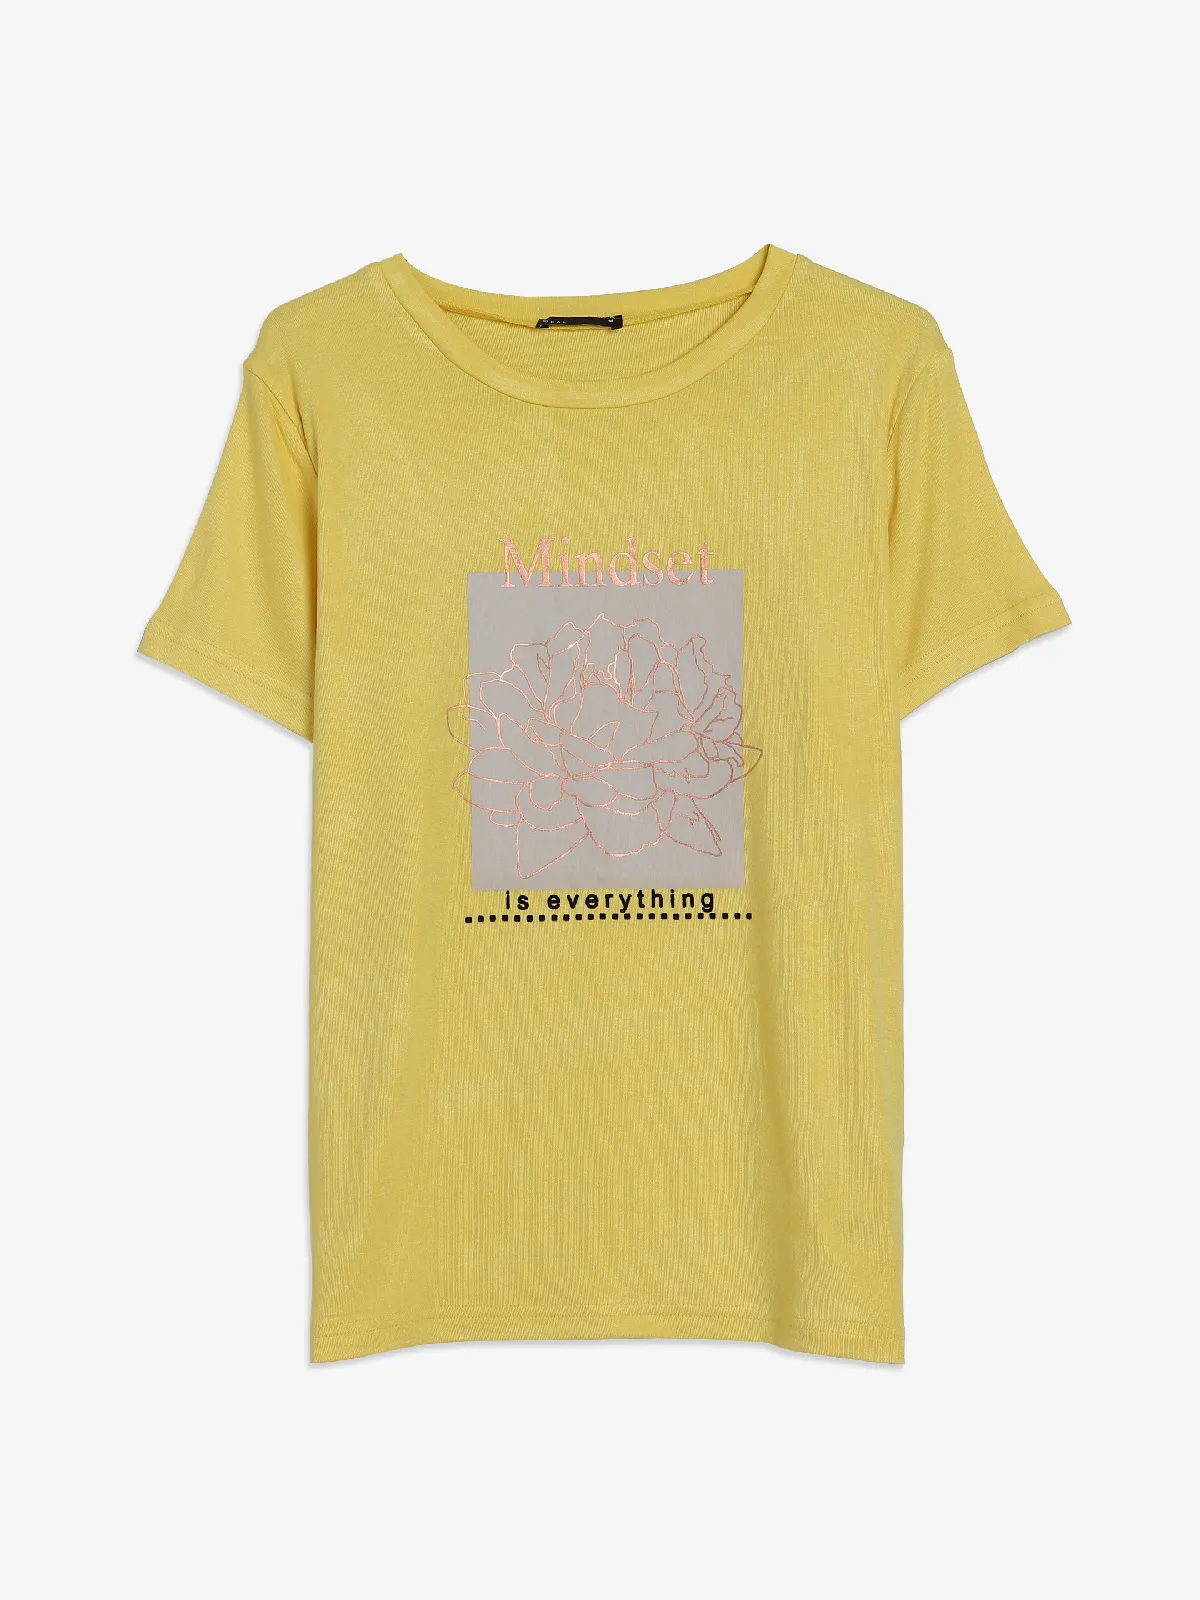 Deal yellow cotton casual t-shirt